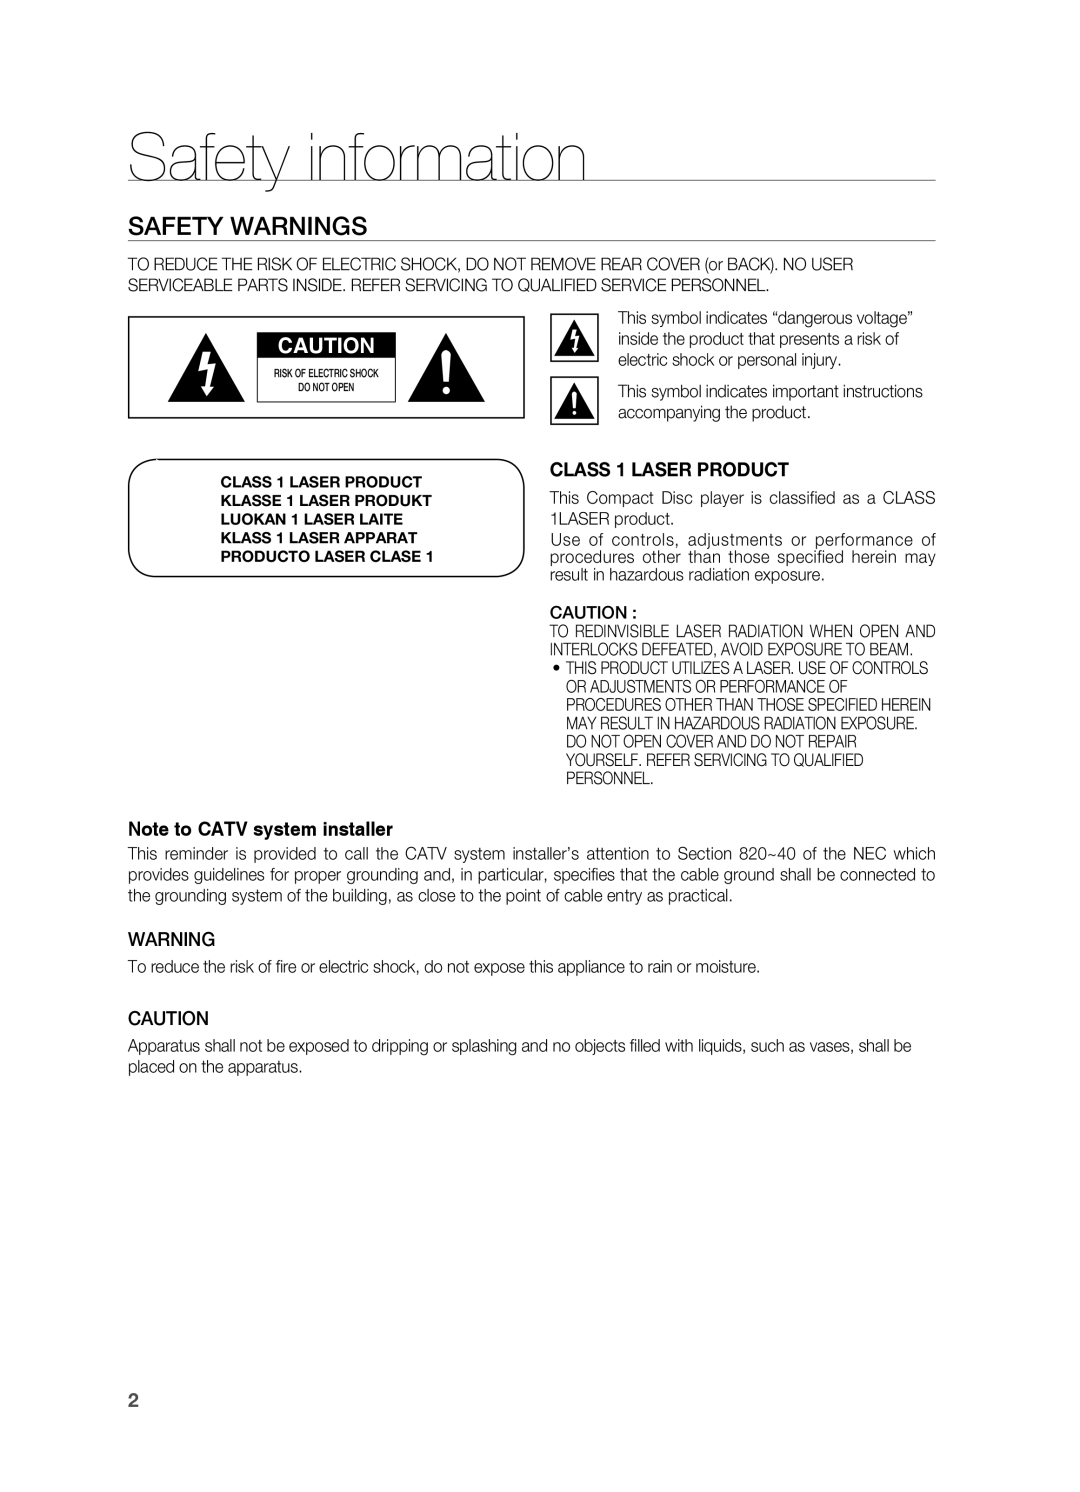 Samsung HT-AS730ST user manual Safety information, Safety Warnings, Note to CATV system installer, CLASS 1 LASER PRODUCT 